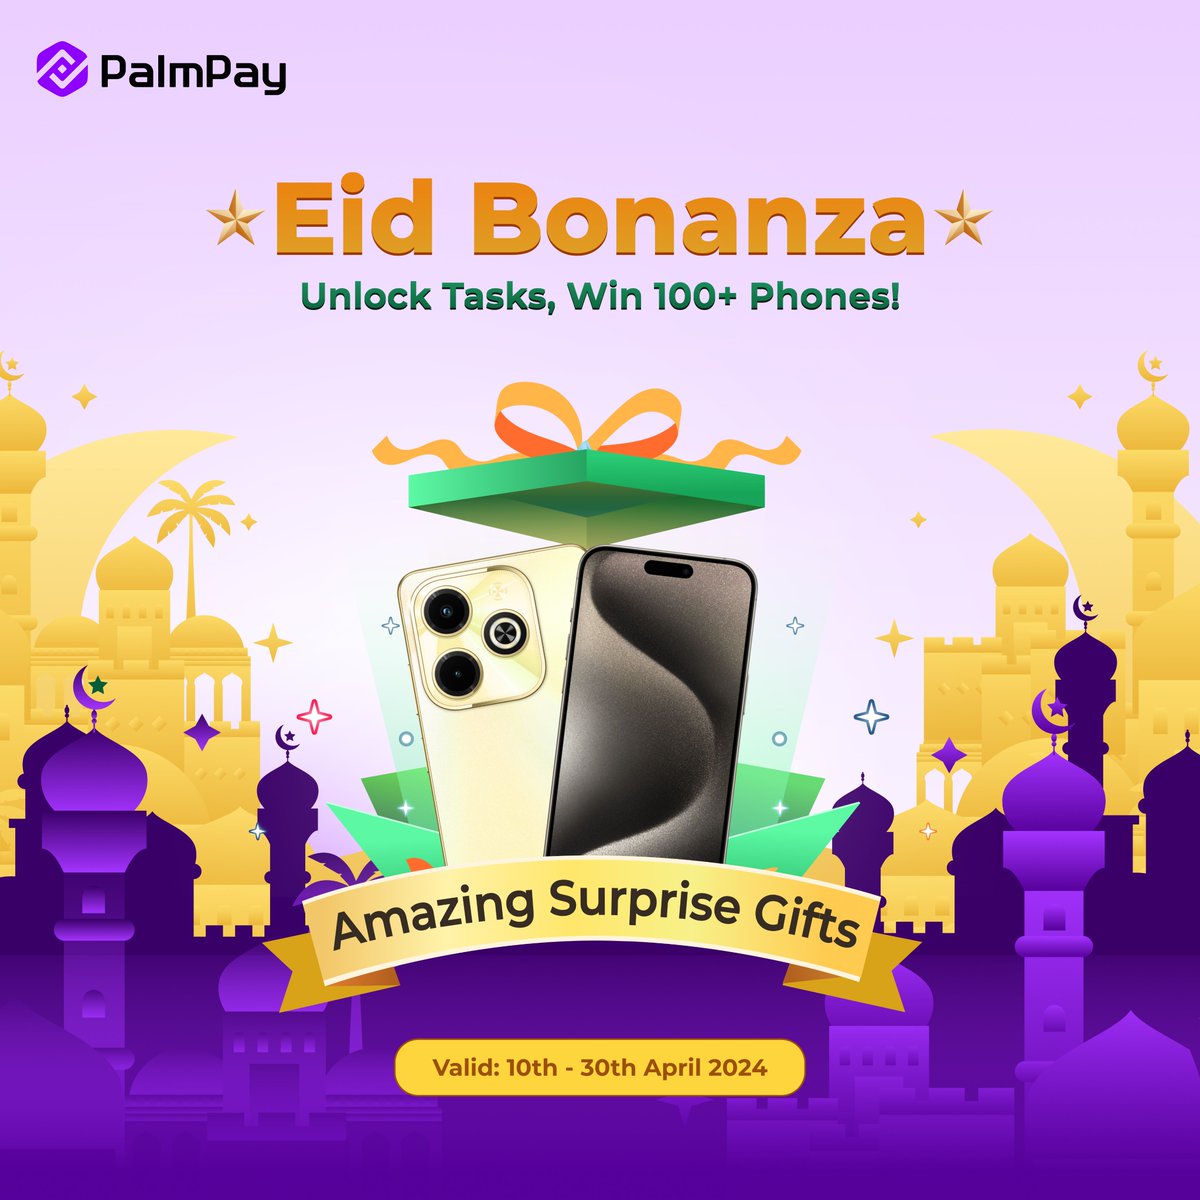 Eid Mubarak! As we celebrate Eid with our Muslim community, we're thrilled to offer you a chance to win amazing phones in our special Eid bonanza! Take part in tasks to increase your odds of winning. Winners will be announced daily in-app at 7am and 7pm from April 10th to 30th.…